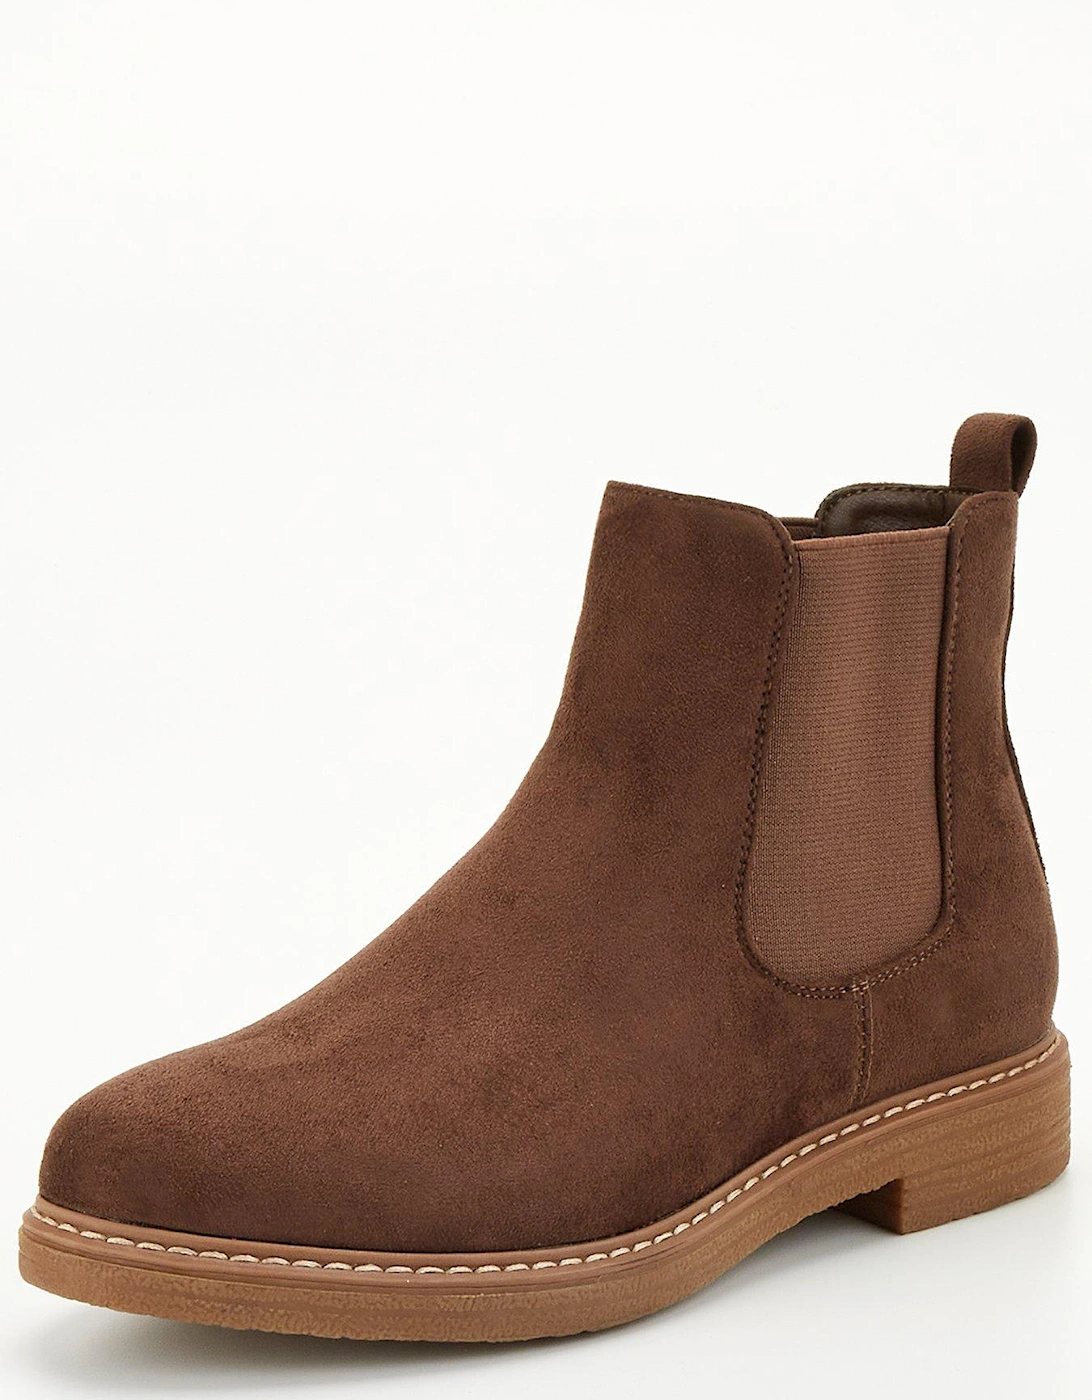 Wide Fit Crepe Sole Chelsea Boot